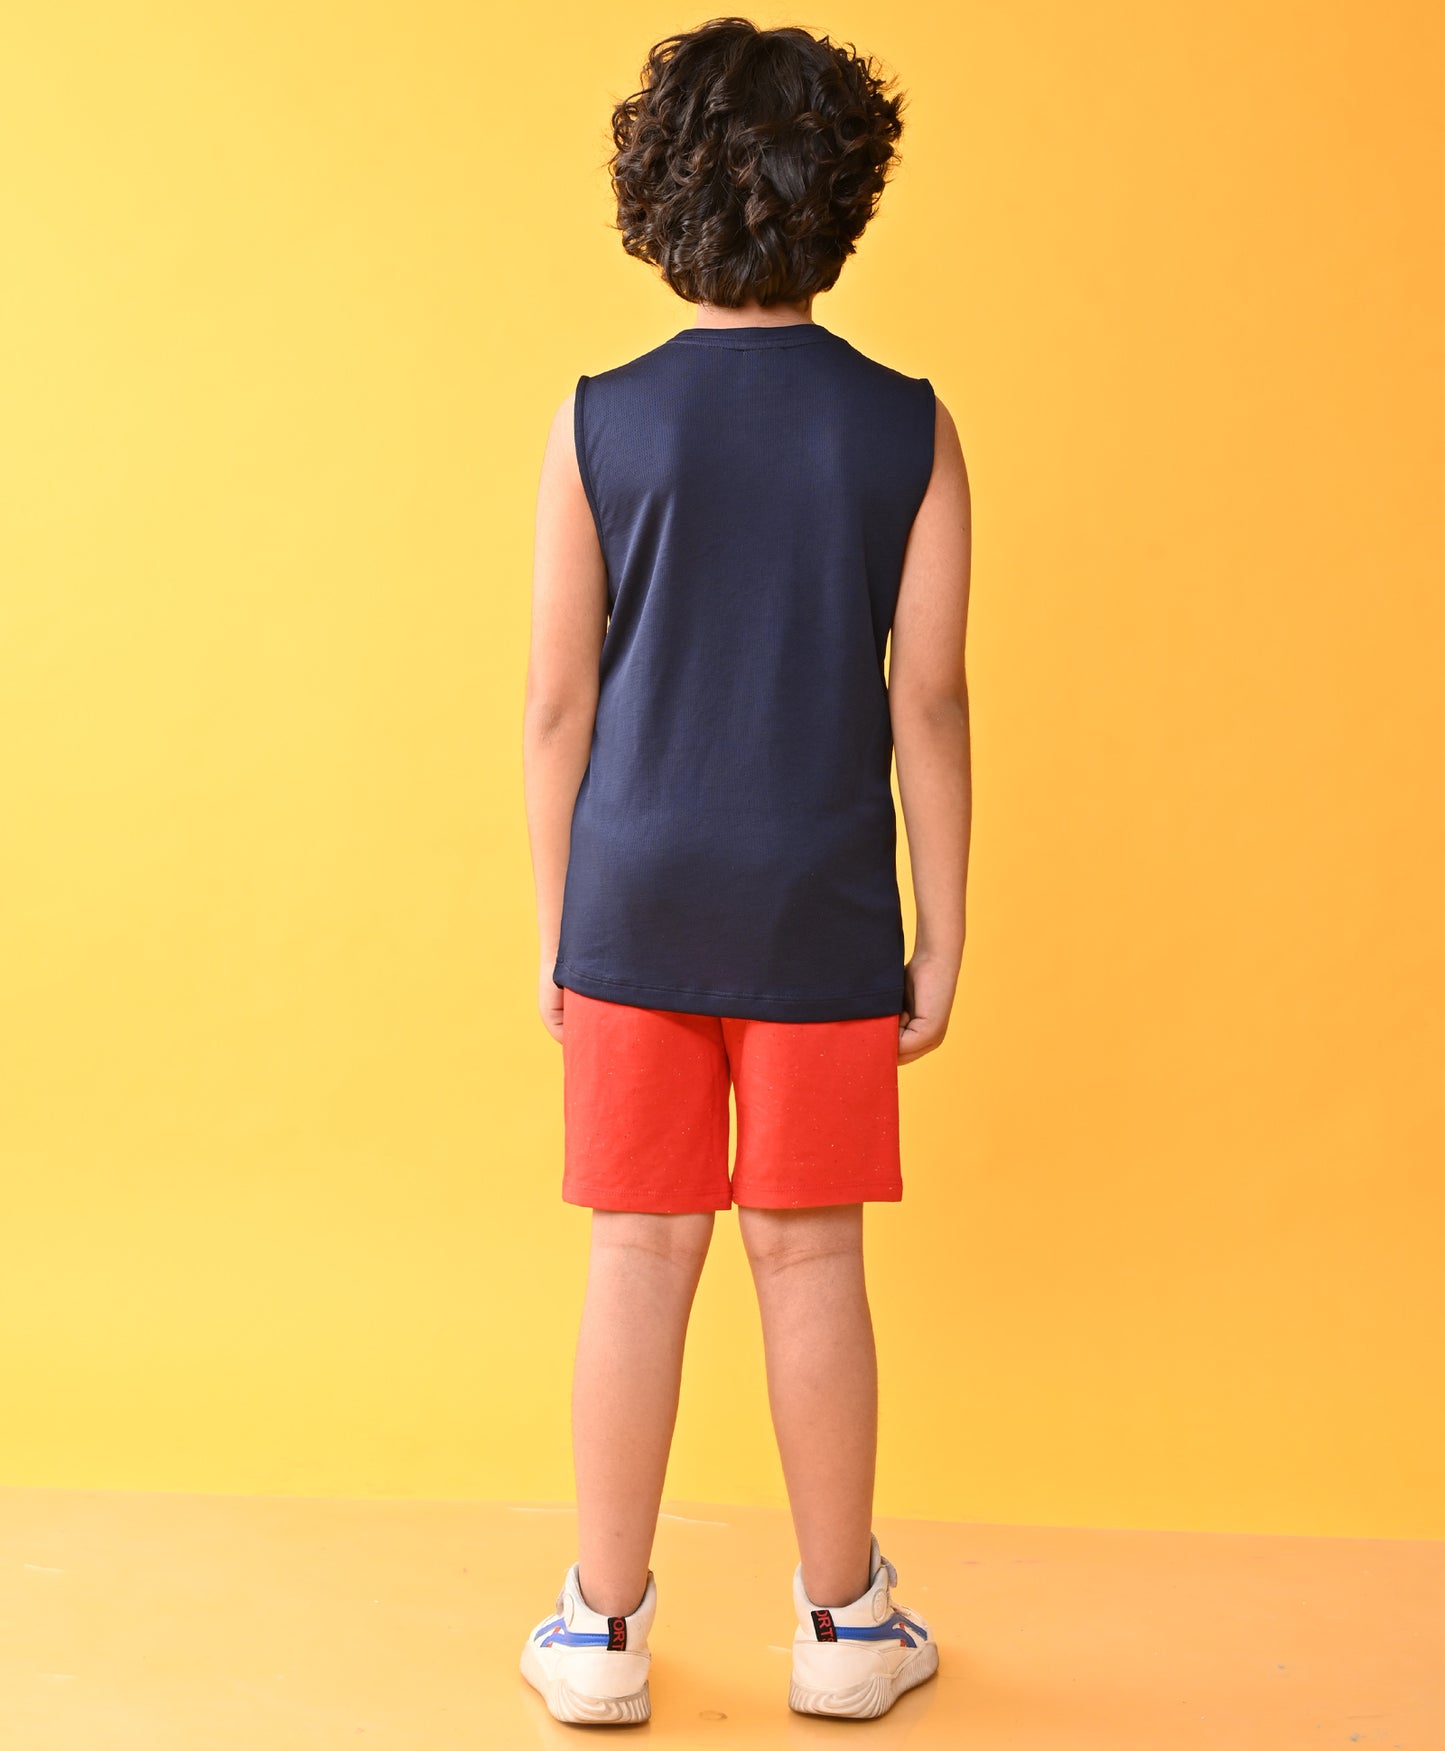 SKATE TIME SPORTY RED SUMMER SHORTS SET - BLUE/RED